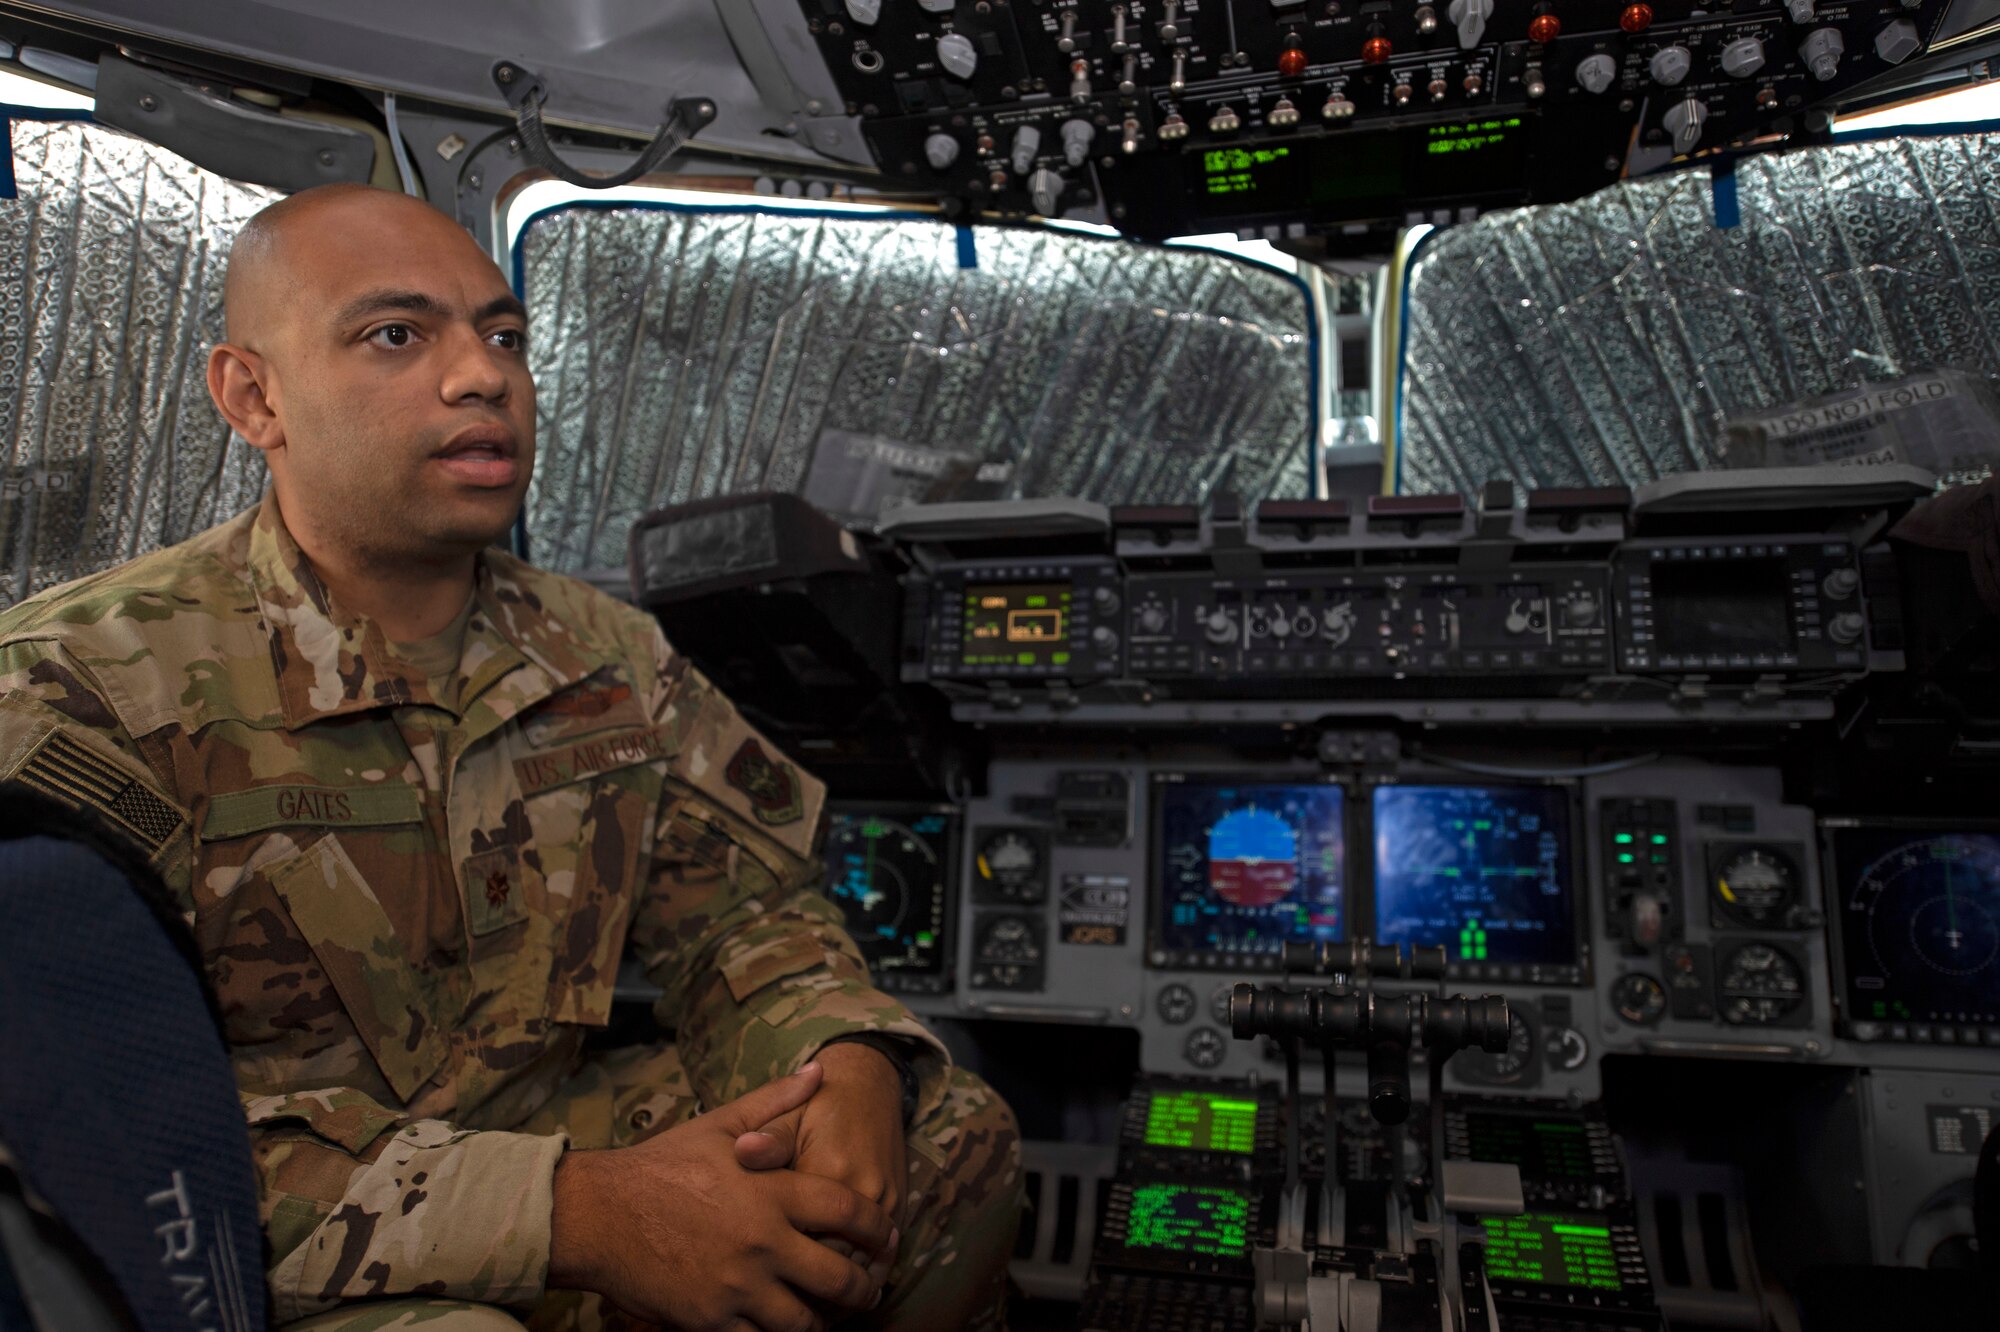 U.S. Air Force Maj. Roger Gates, 21st Airlift Squadron instructor pilot and assistant directive officer, describes a United States Agency for International Development mission Aug. 27, 2020, in a C-17 Globemaster III at Travis Air Force Base, California. Gates has served in the U.S. Air Force for 10 years and is a native of Georgia. (U.S. Air Force photo by Senior Airman Jonathon Carnell)